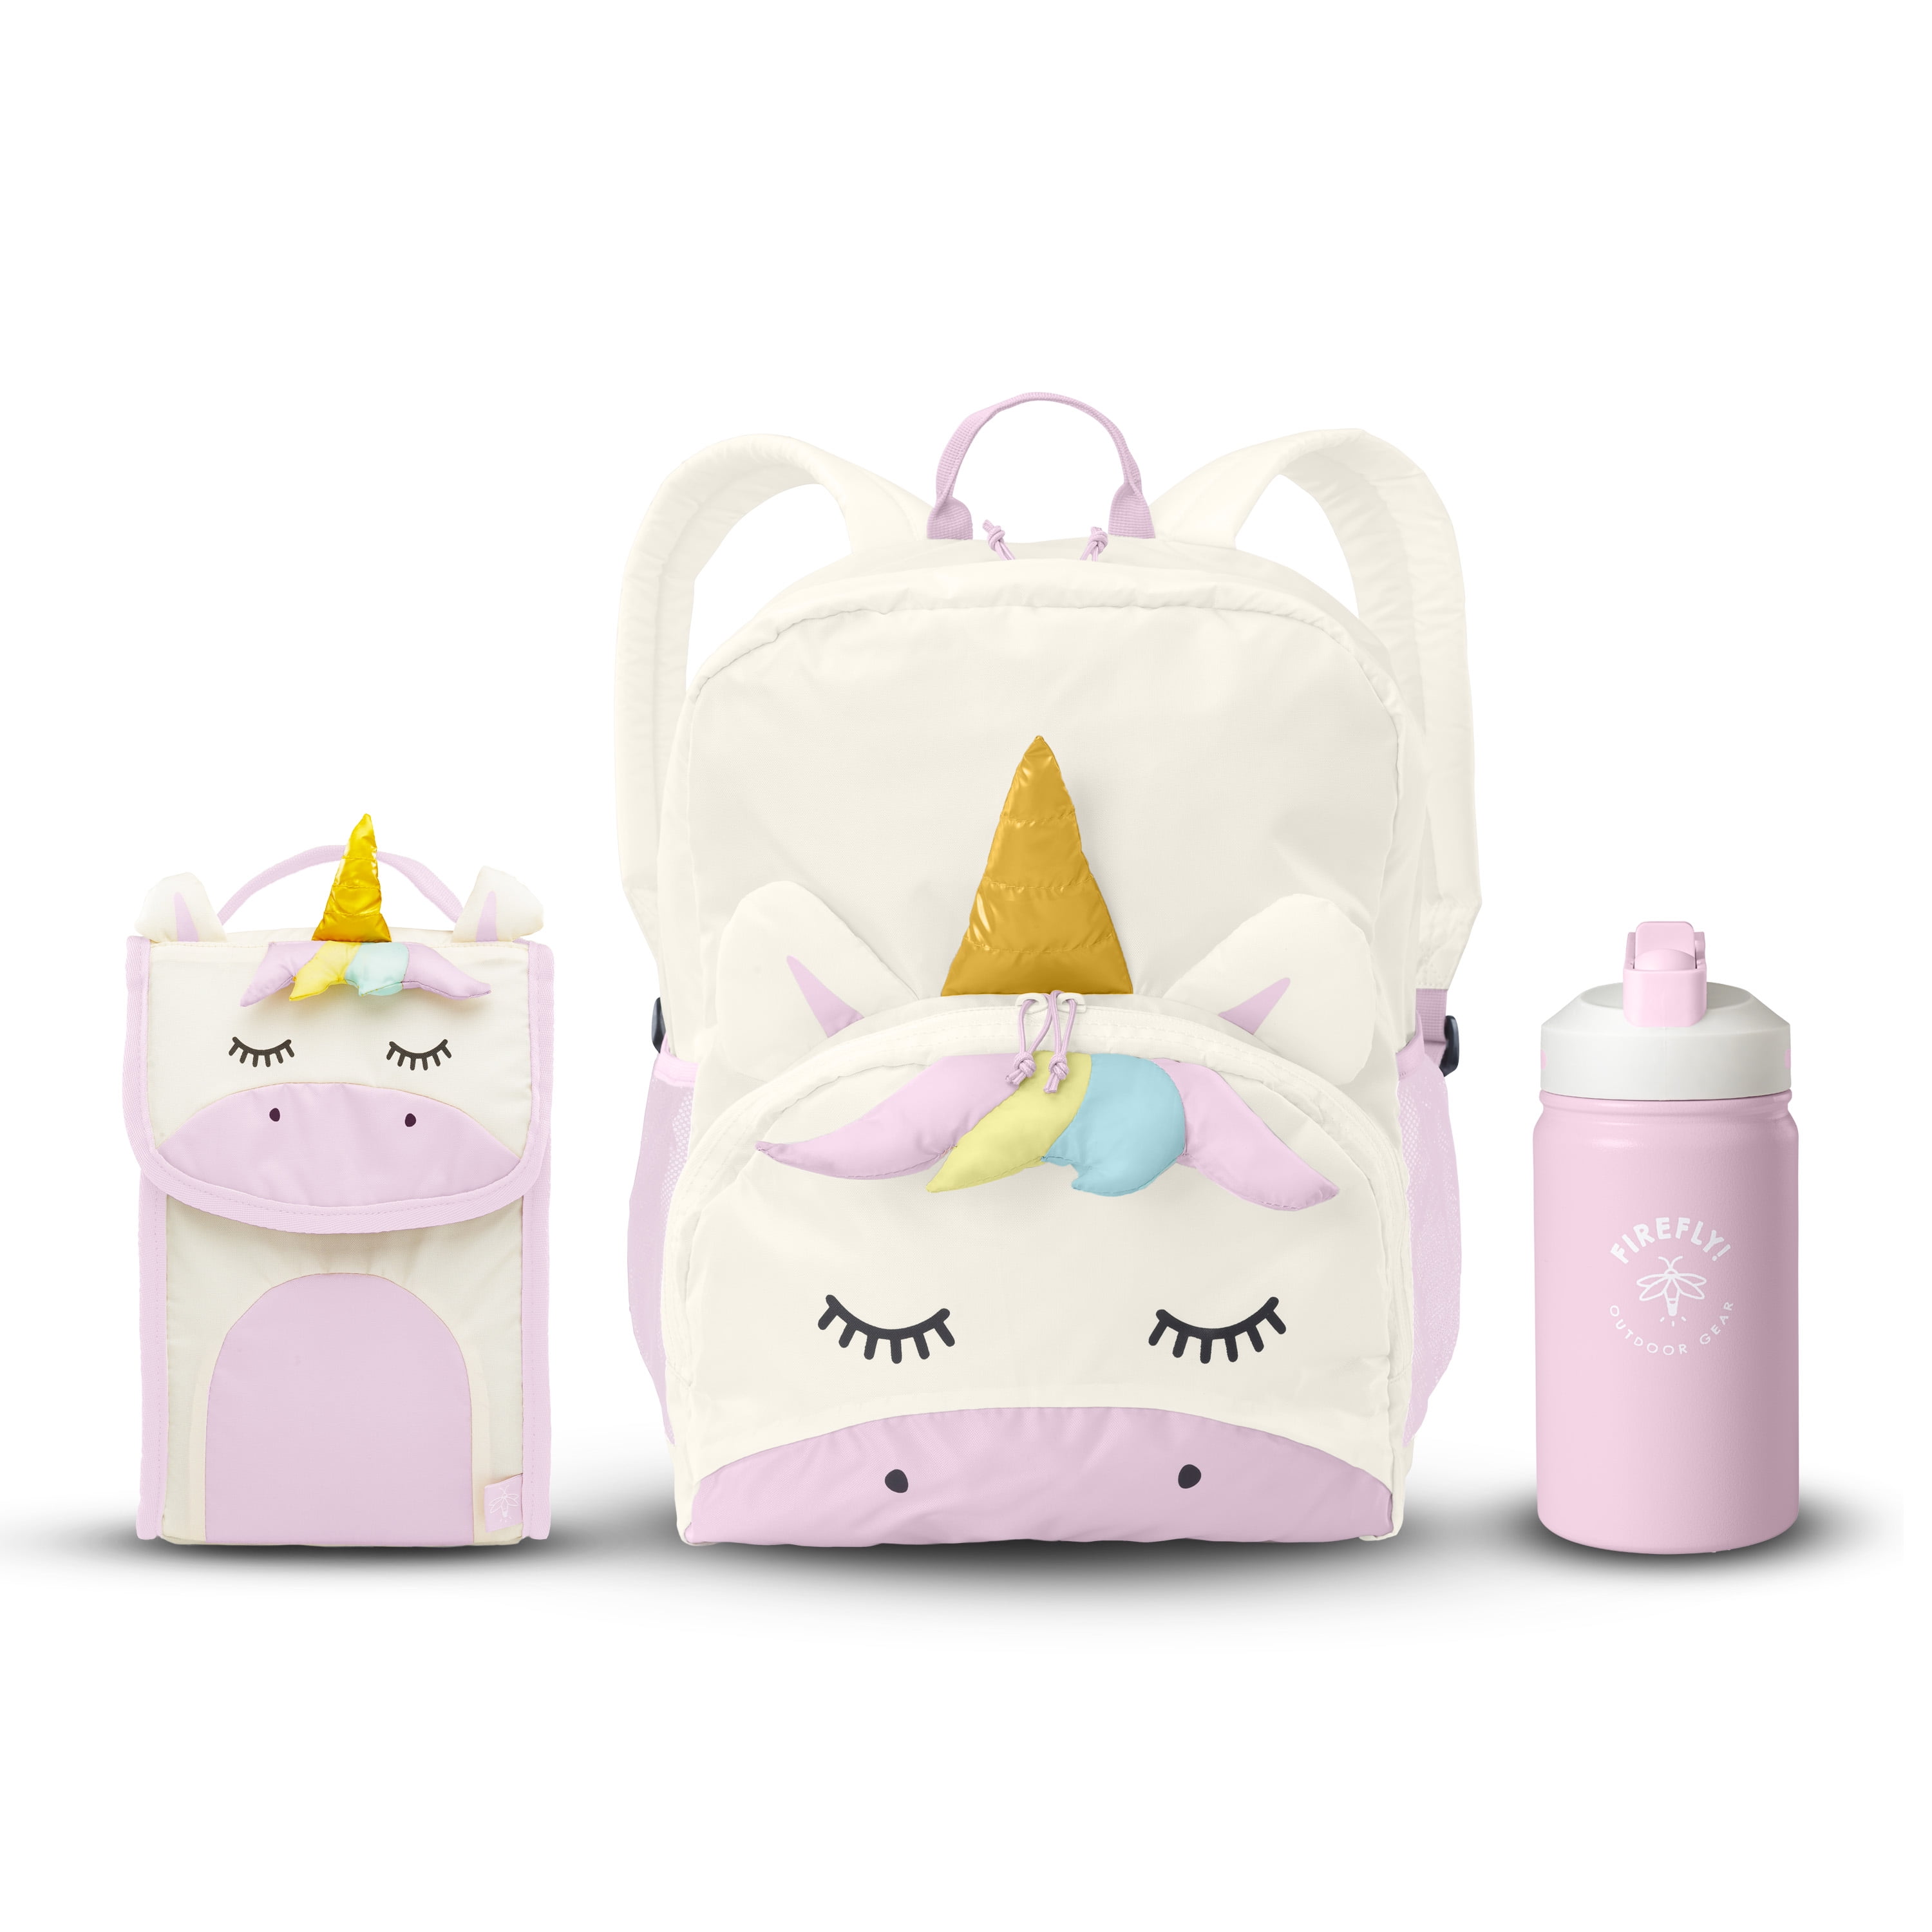 Firefly! Outdoor Gear Sparkle The Unicorn Kid's Backpack - Cream/Pink (15 liter), Unisex, Size: 15 Large